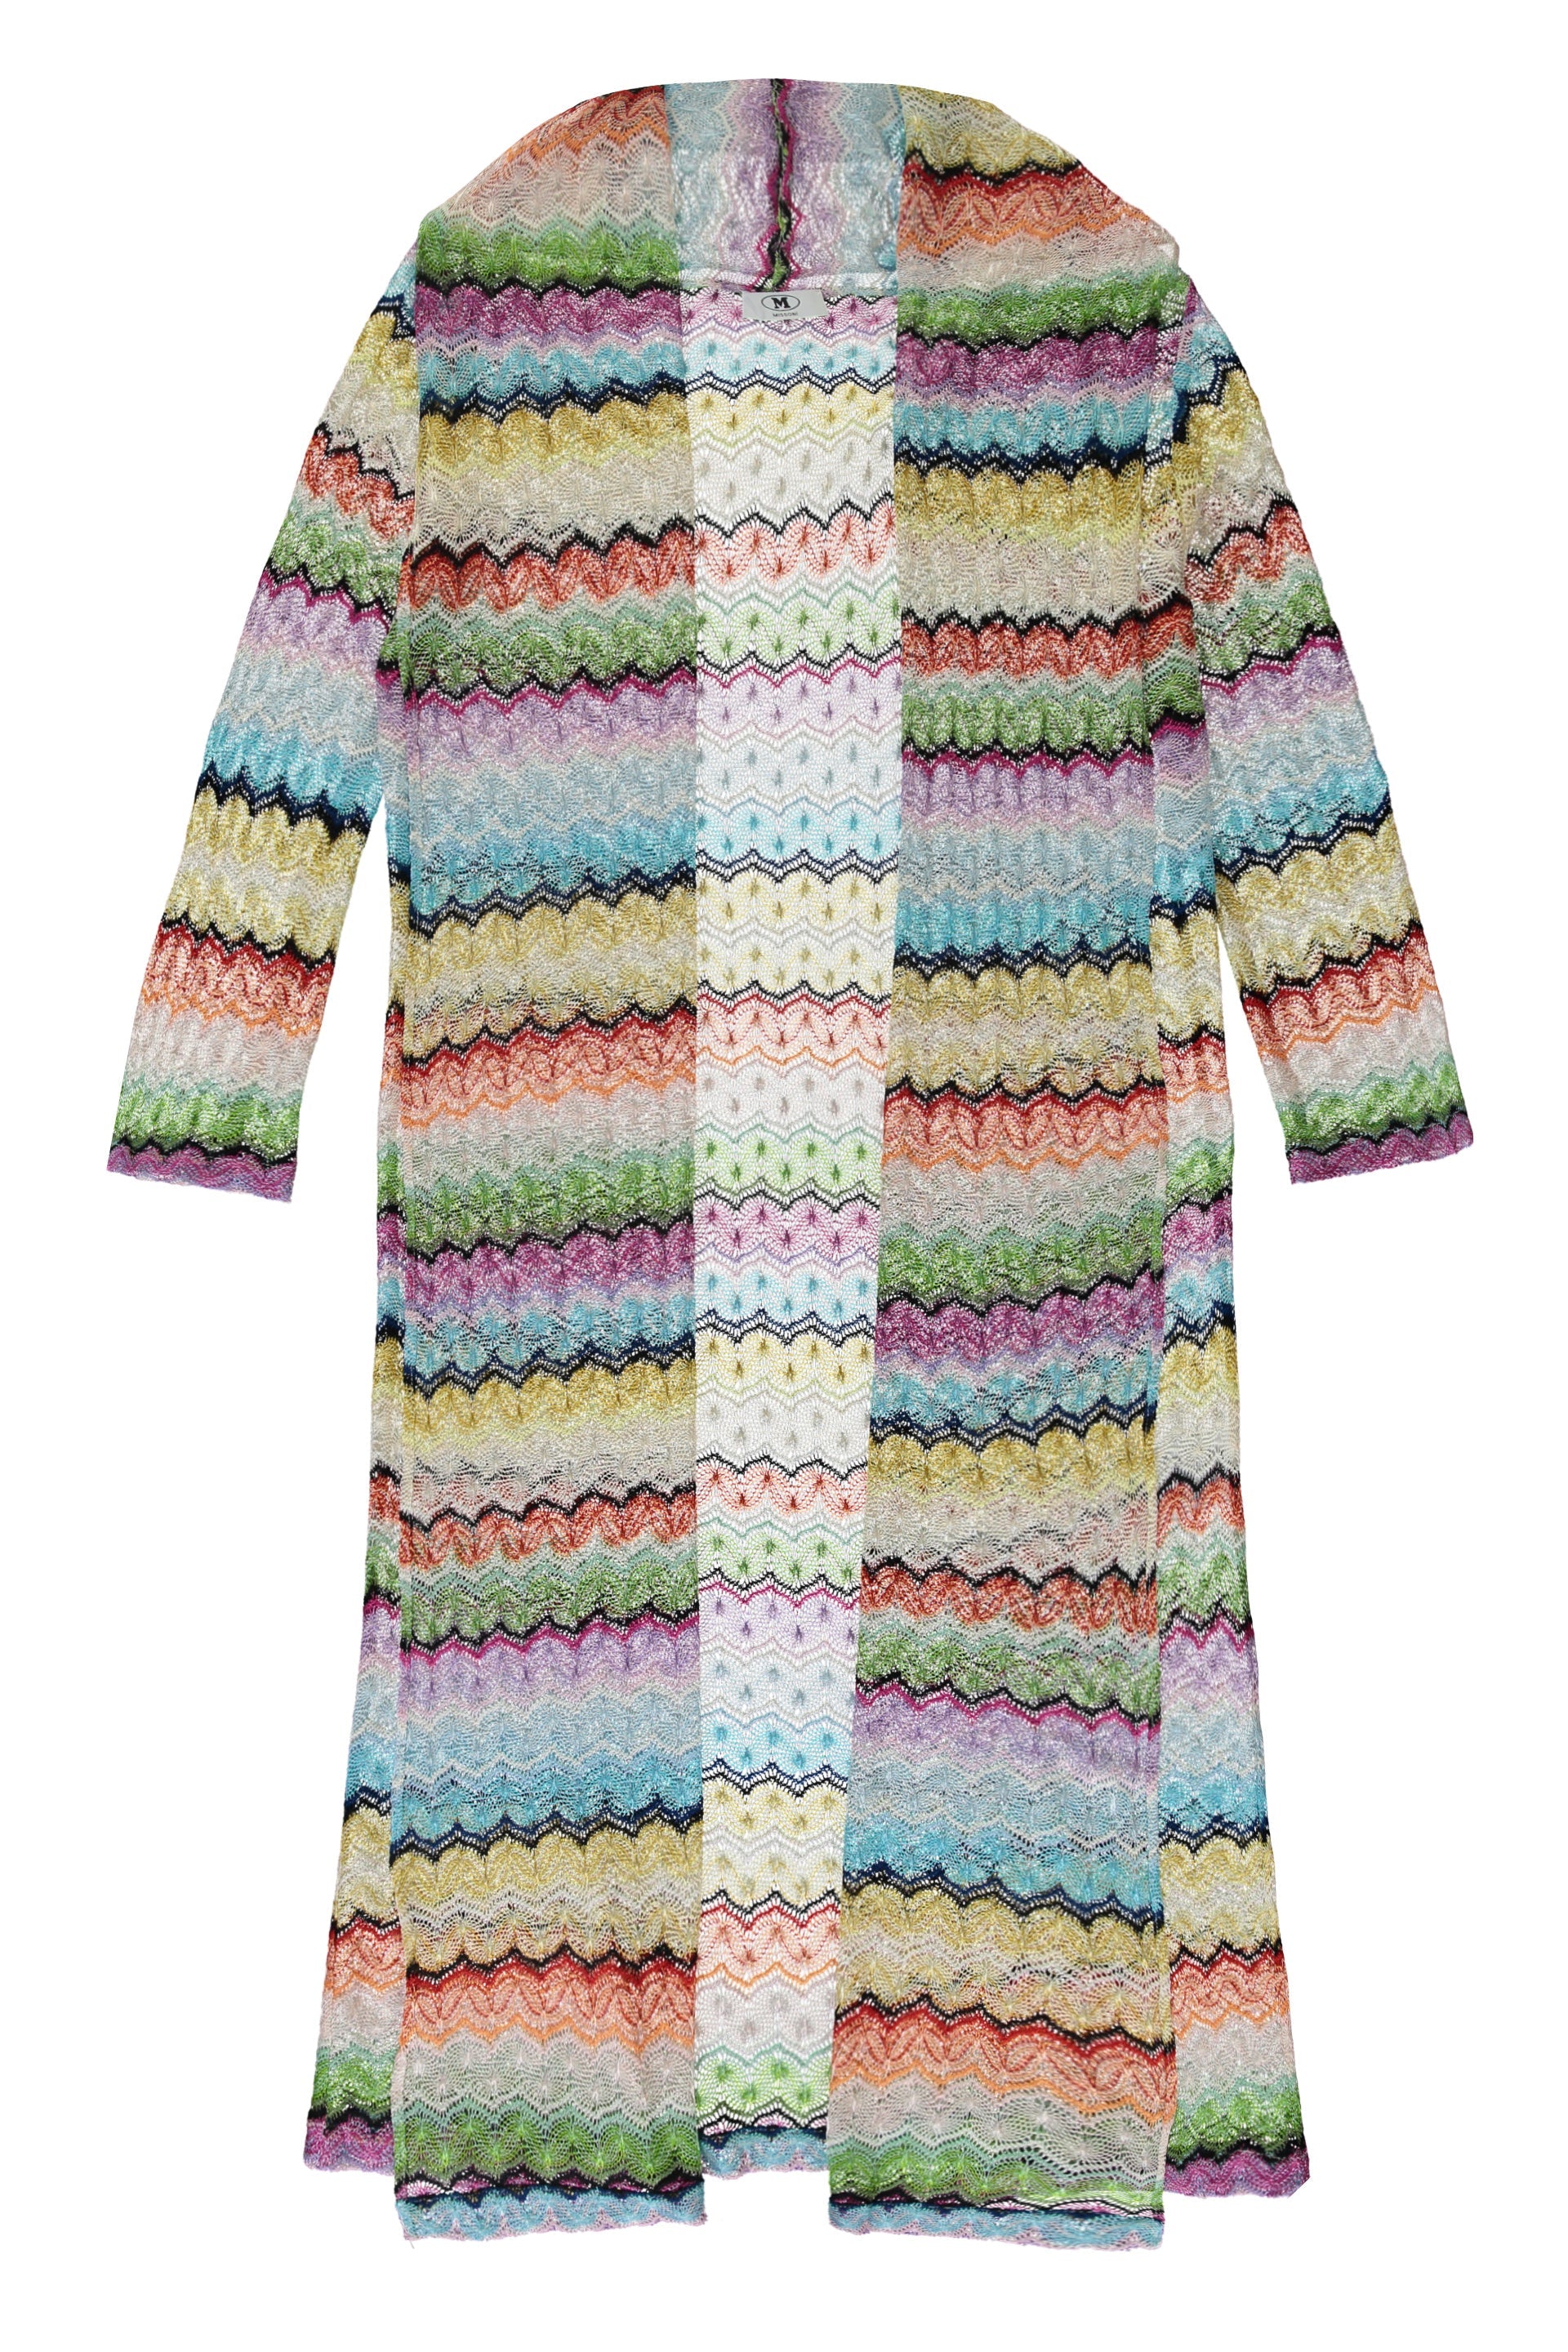 Knitted cover-up dress